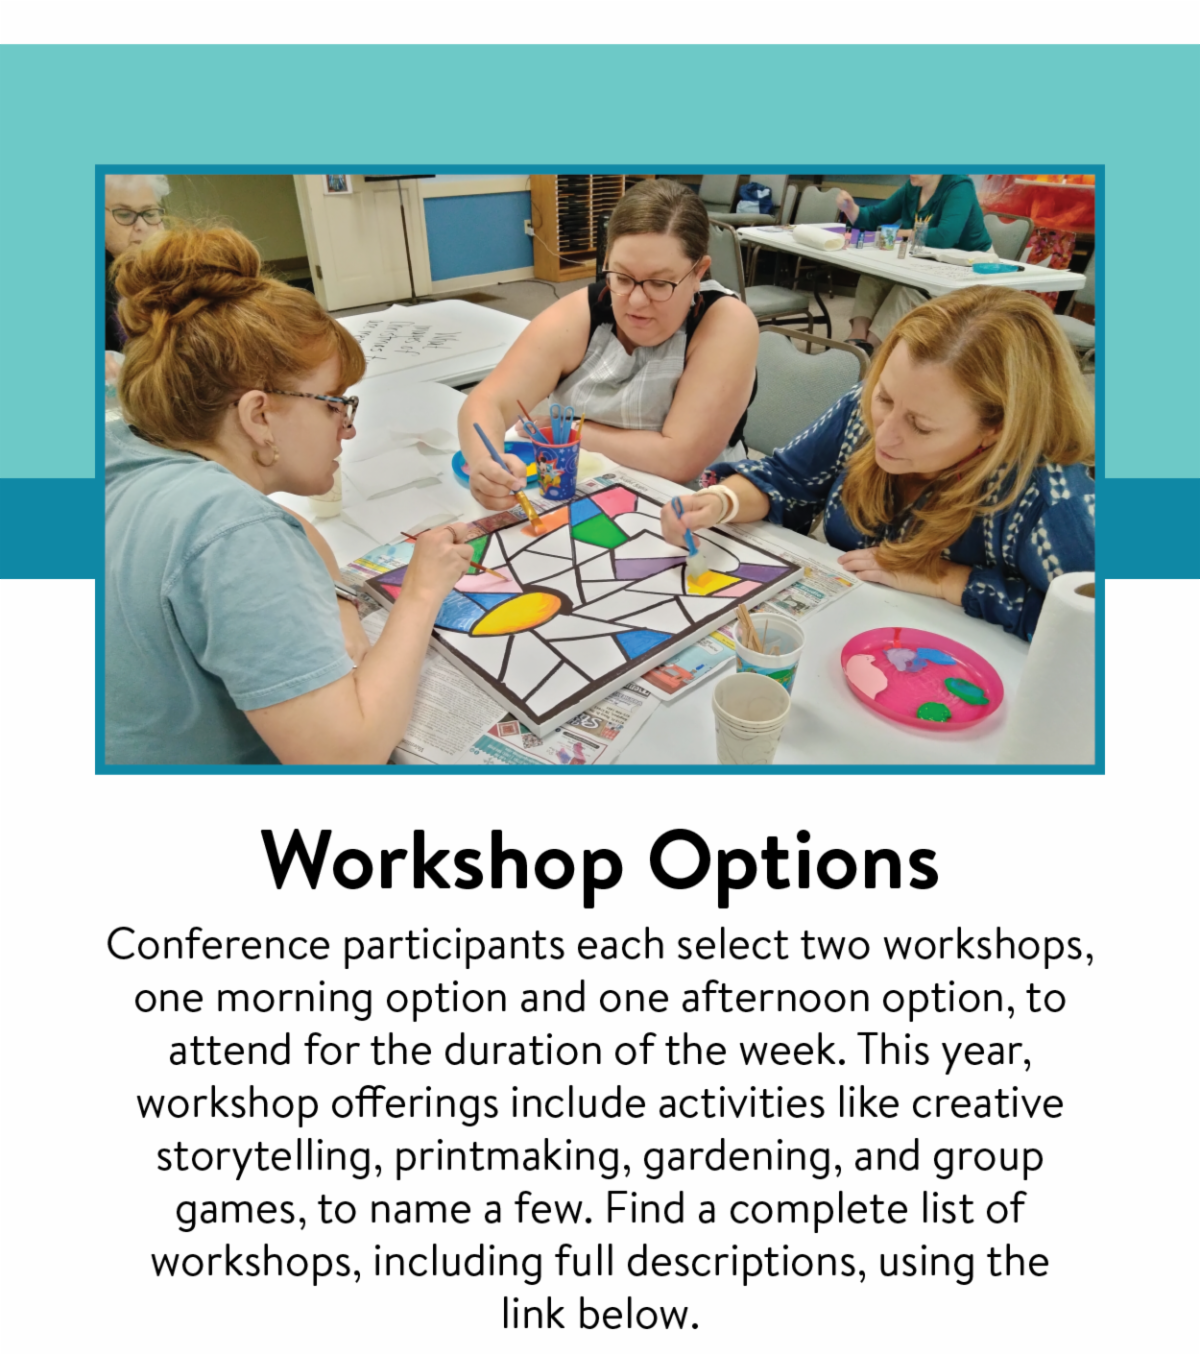 Workshop Options - Conference participants each select two workshops, one morning option and one afternoon option, to attend for the duration of the week. This year, workshop offerings include activities like creative storytelling, printmaking, gardening, and group games, to name a few. Find a complete list of workshops, including full descriptions, using the link below.